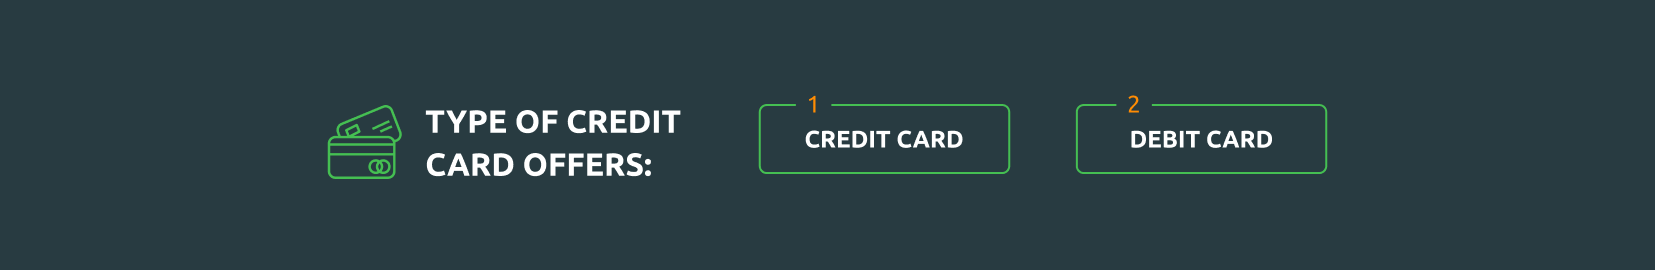 type of credit card offers